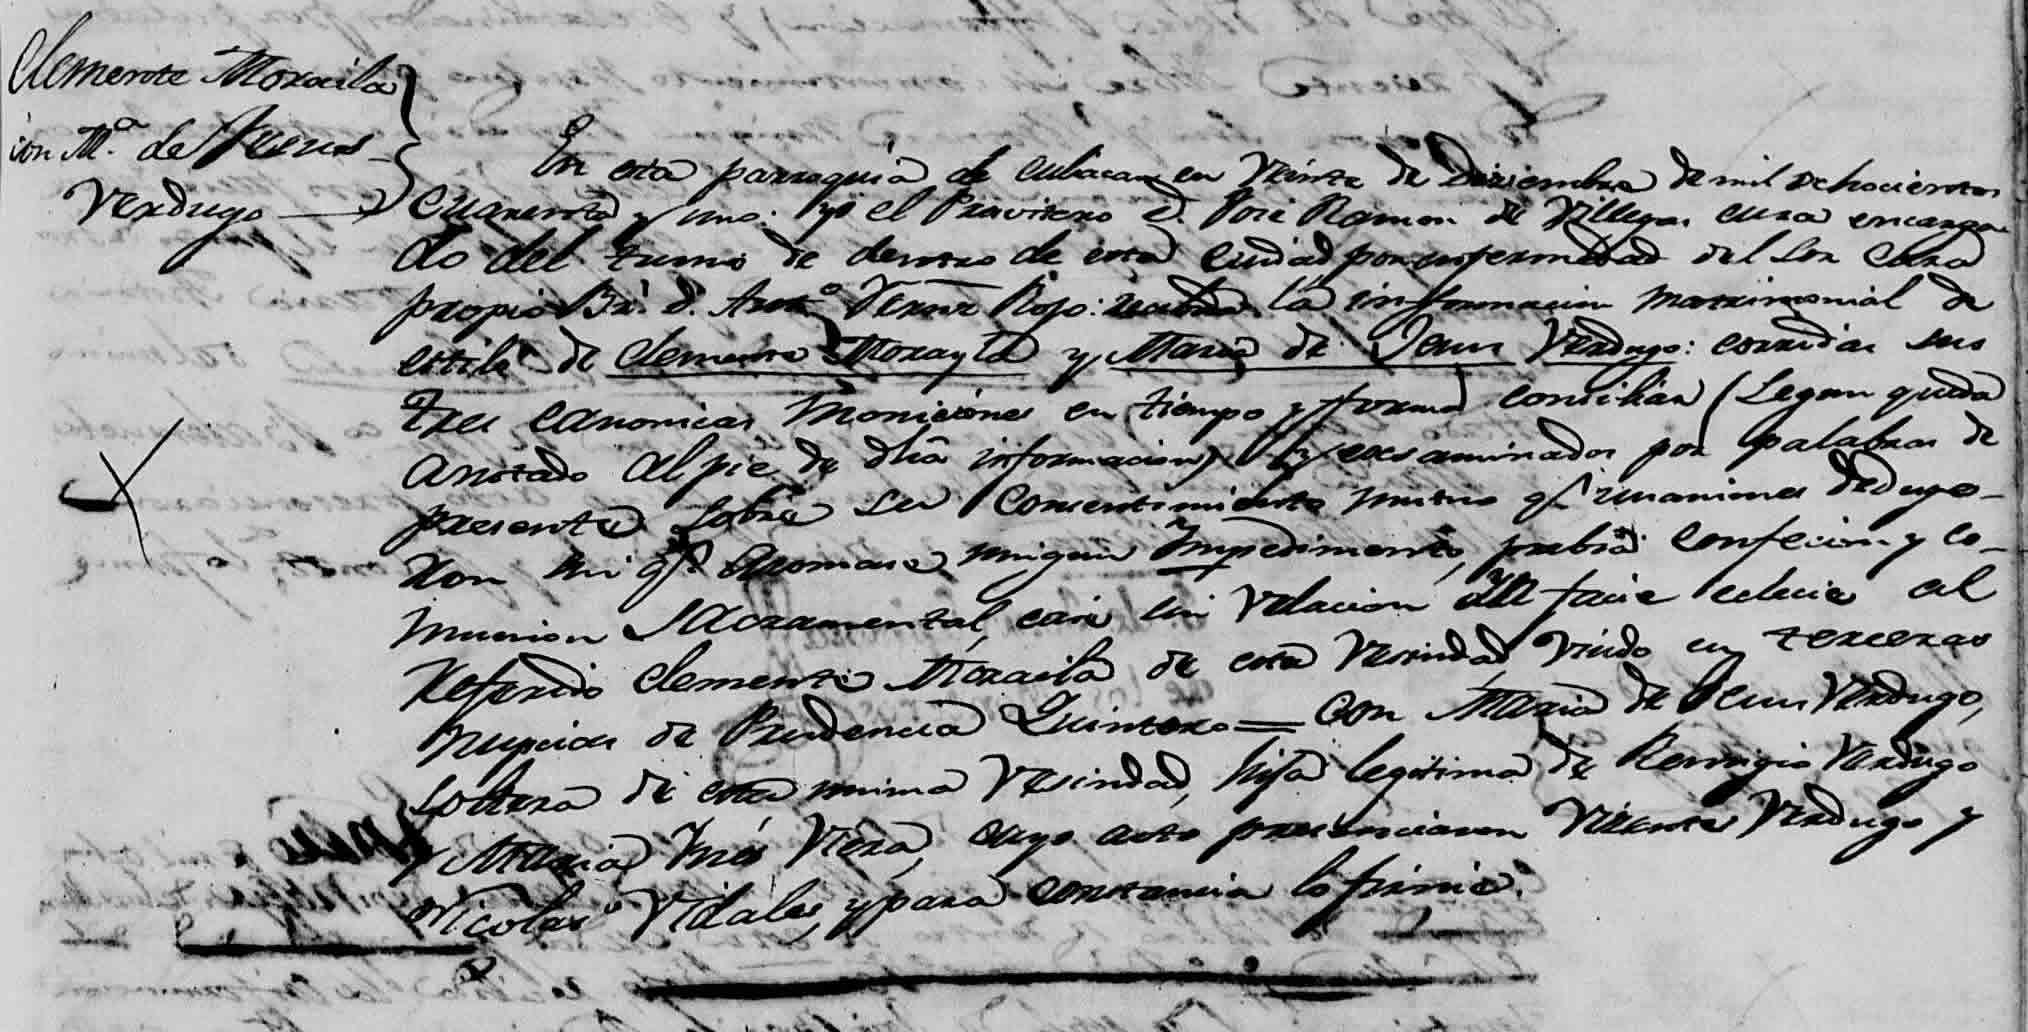 Marriage Record of Clemente Moraila and María de Jesús Verdugo from the Cathedral of San Miguel, Culiacán